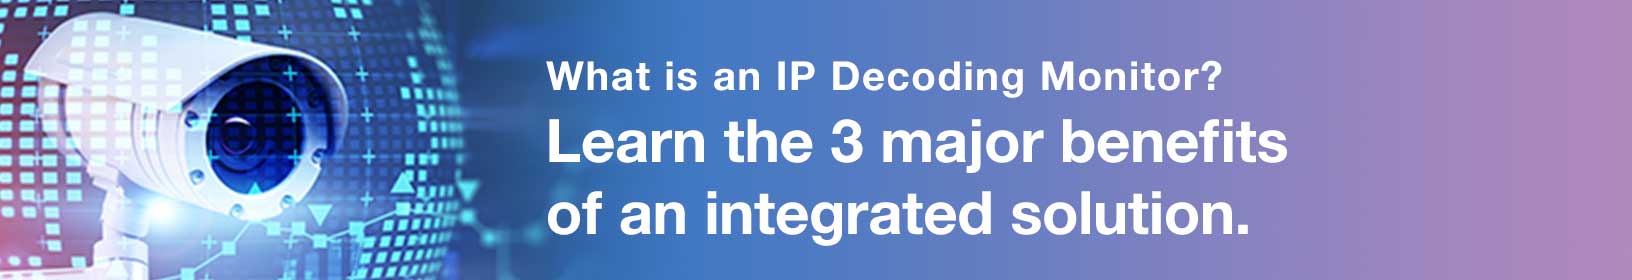 What is an IP Decoding Monitor?